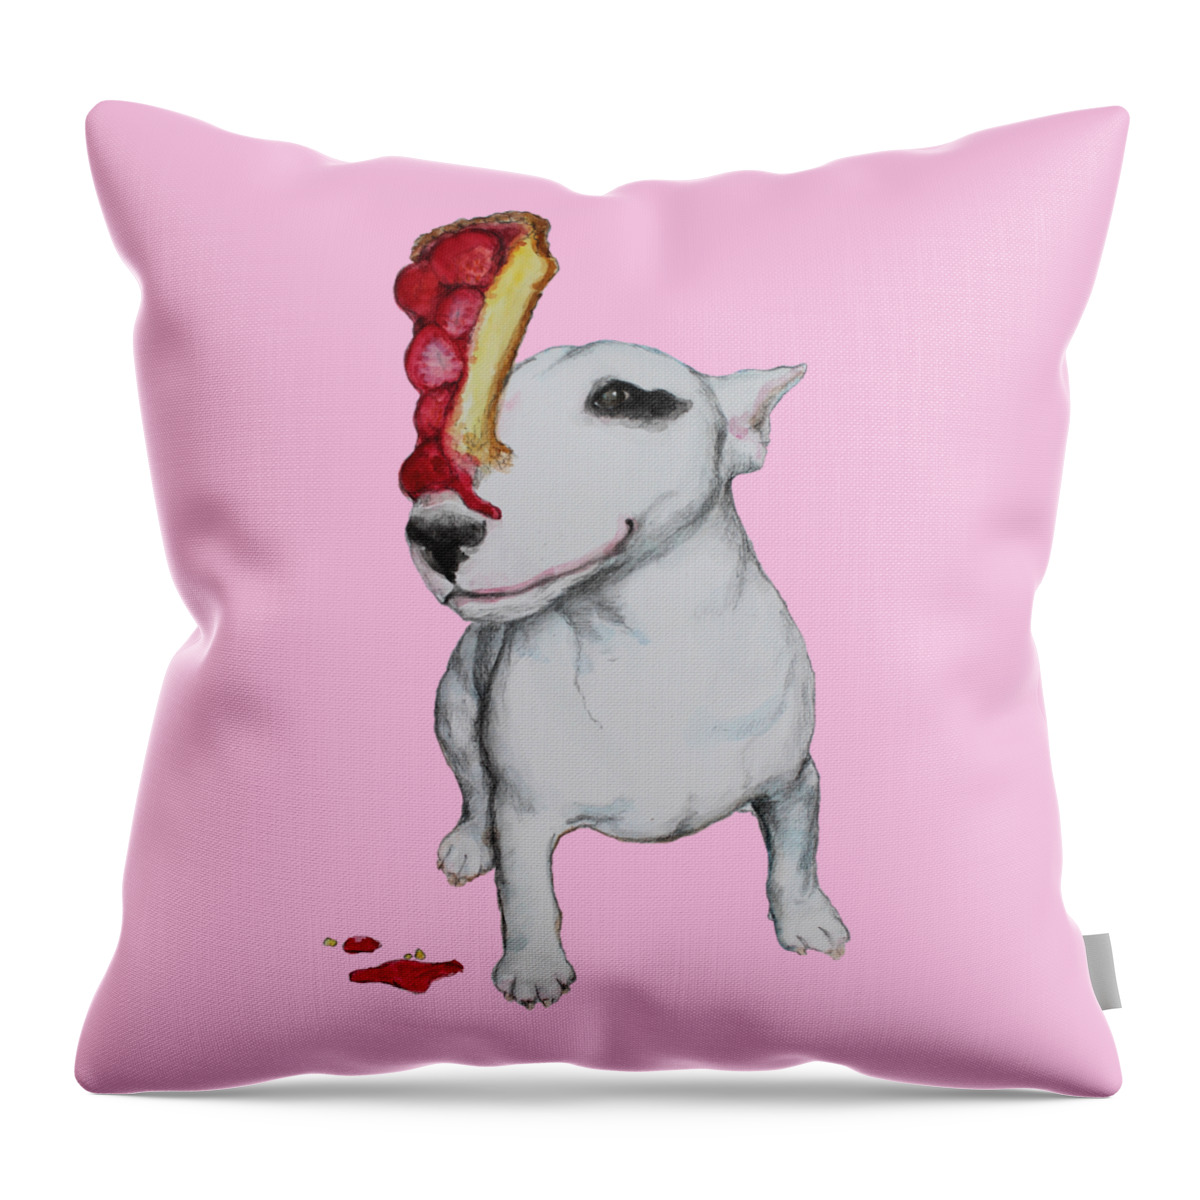 Noewi Throw Pillow featuring the painting Balanced Diet by Jindra Noewi